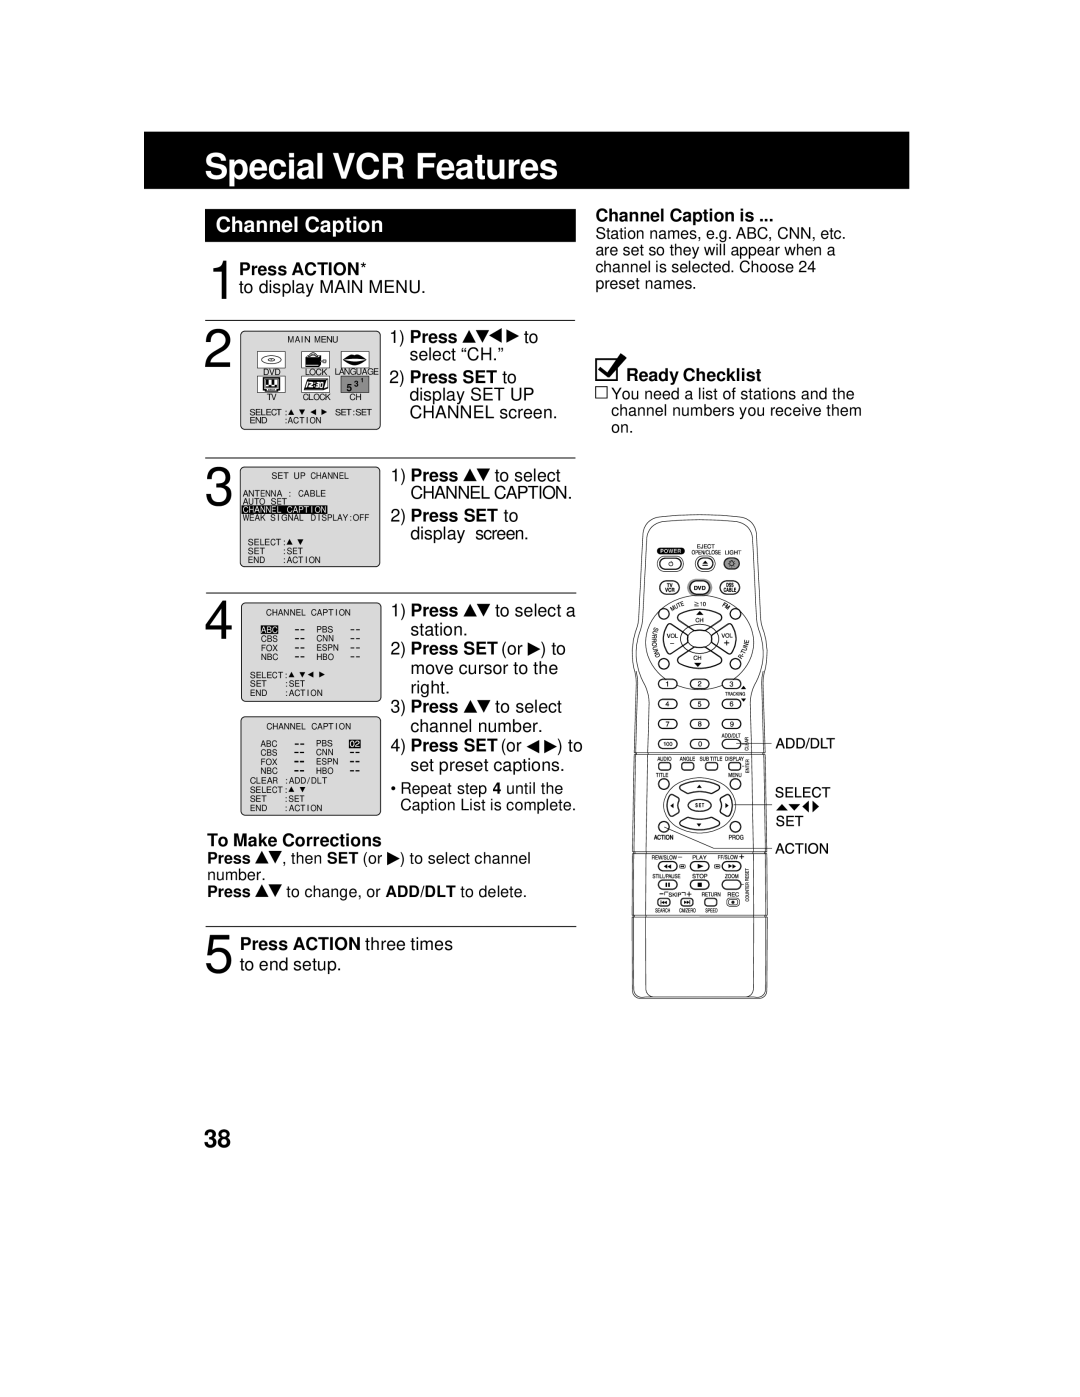 Panasonic AG 527DVDE manual Special VCR Features, Channel Caption is, Press SET or, To Make Corrections, Press ACTION 